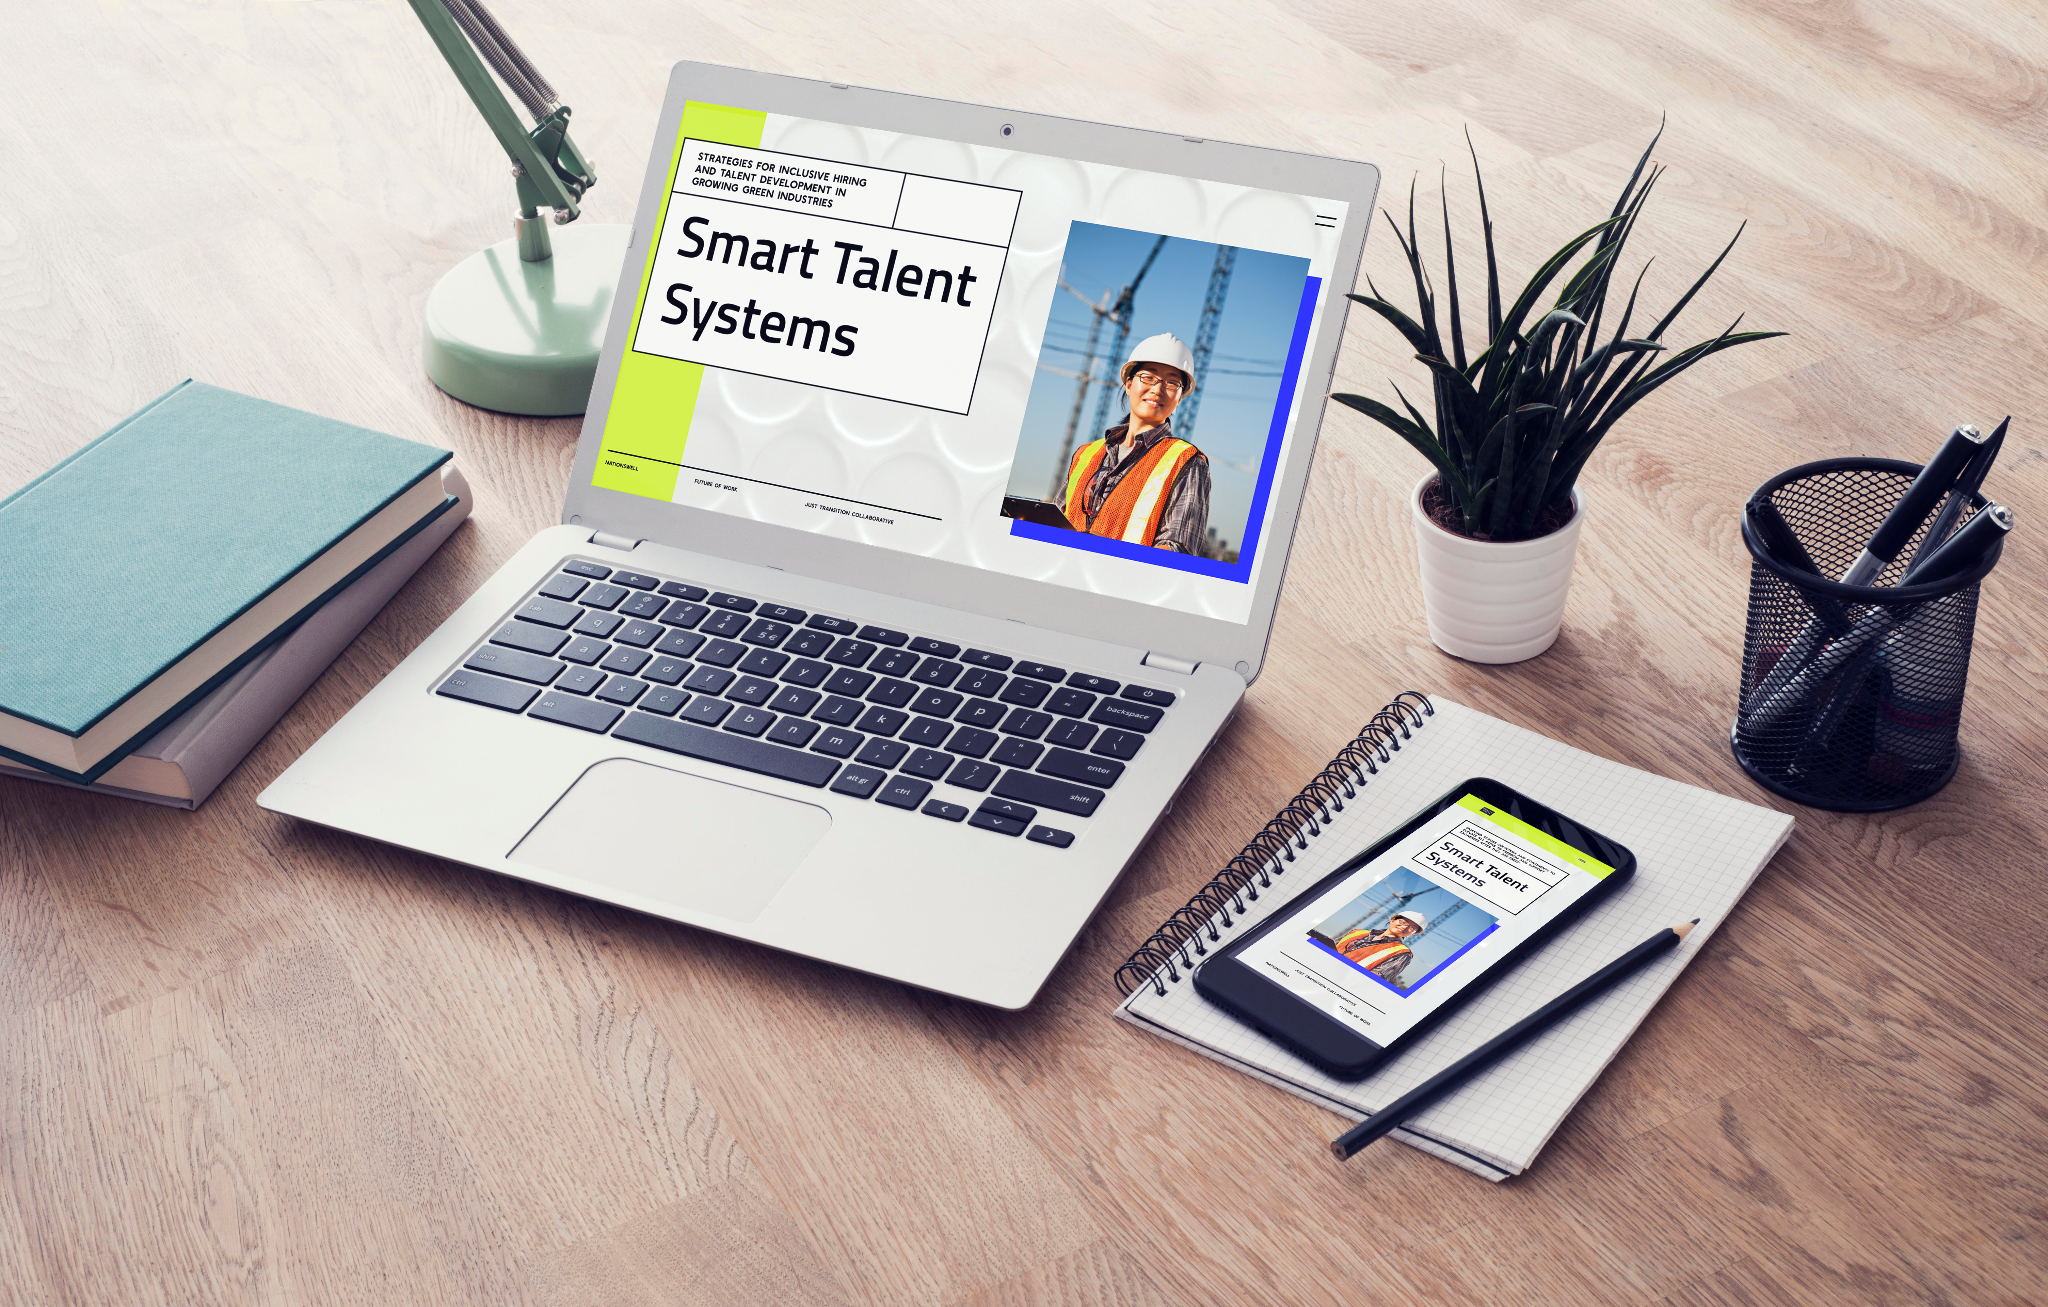 Smart Talent Systems